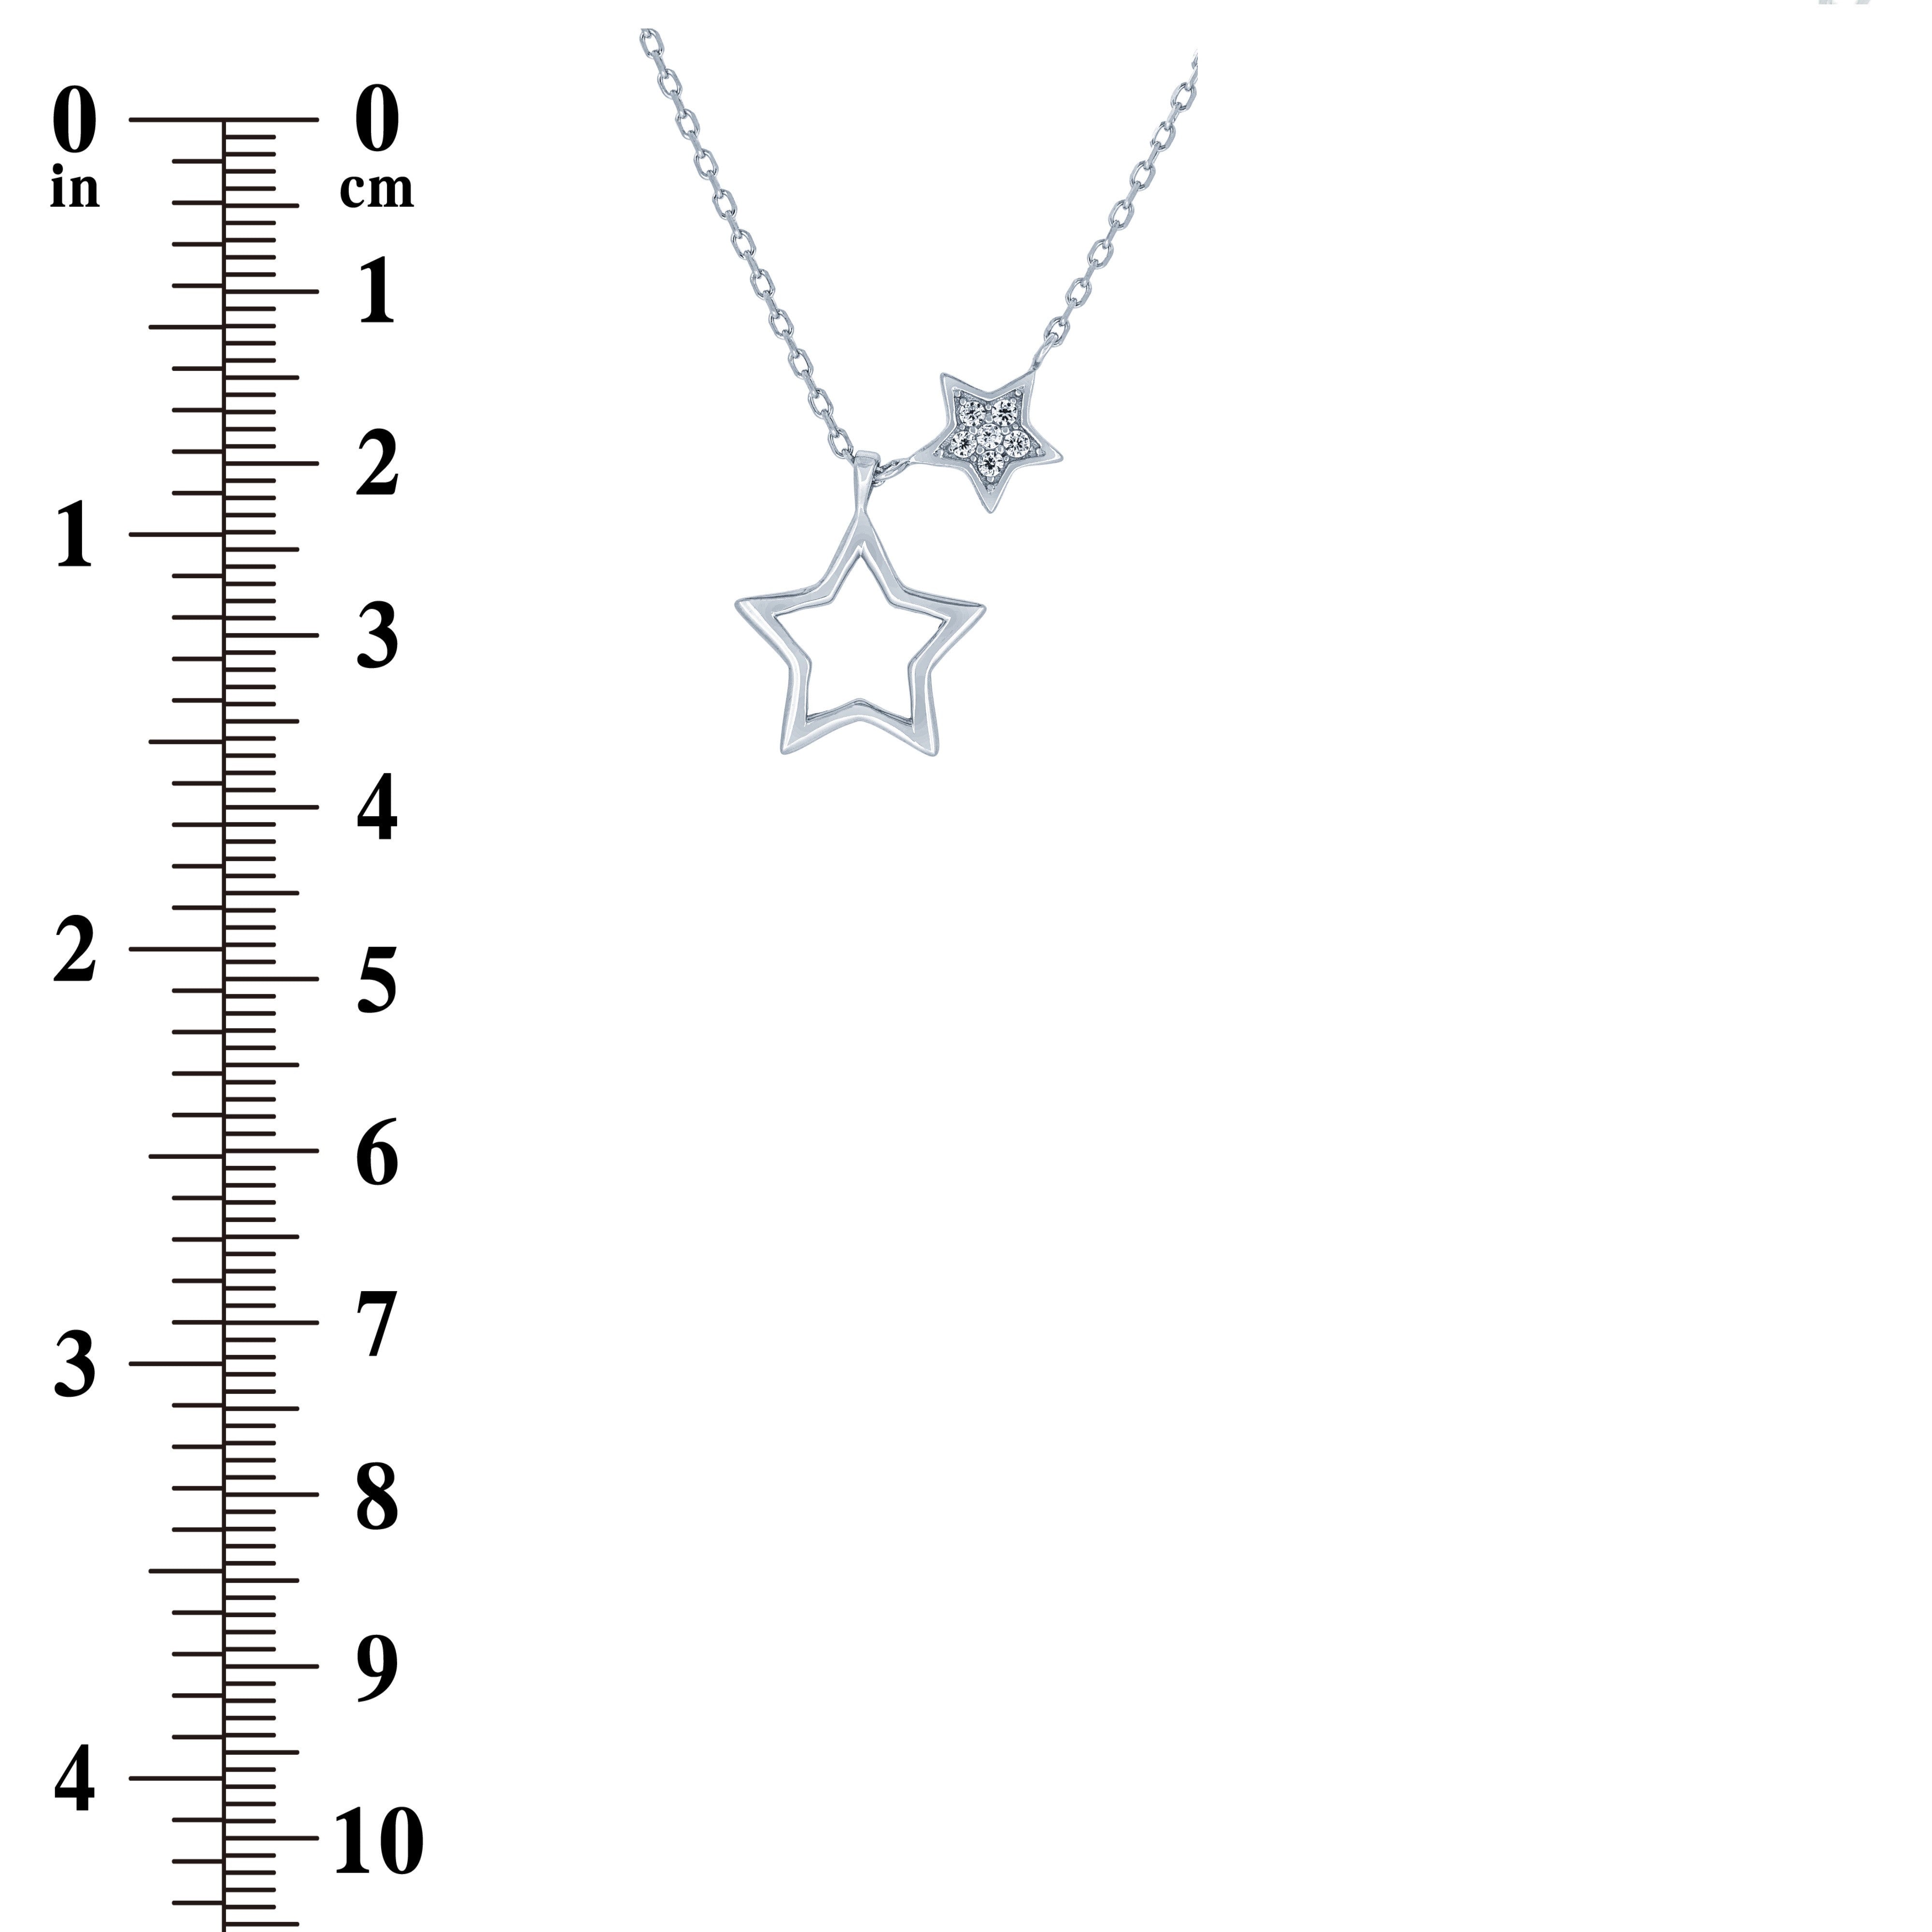 (100084) White Cubic Zirconia Stars Necklace In Sterling Silver